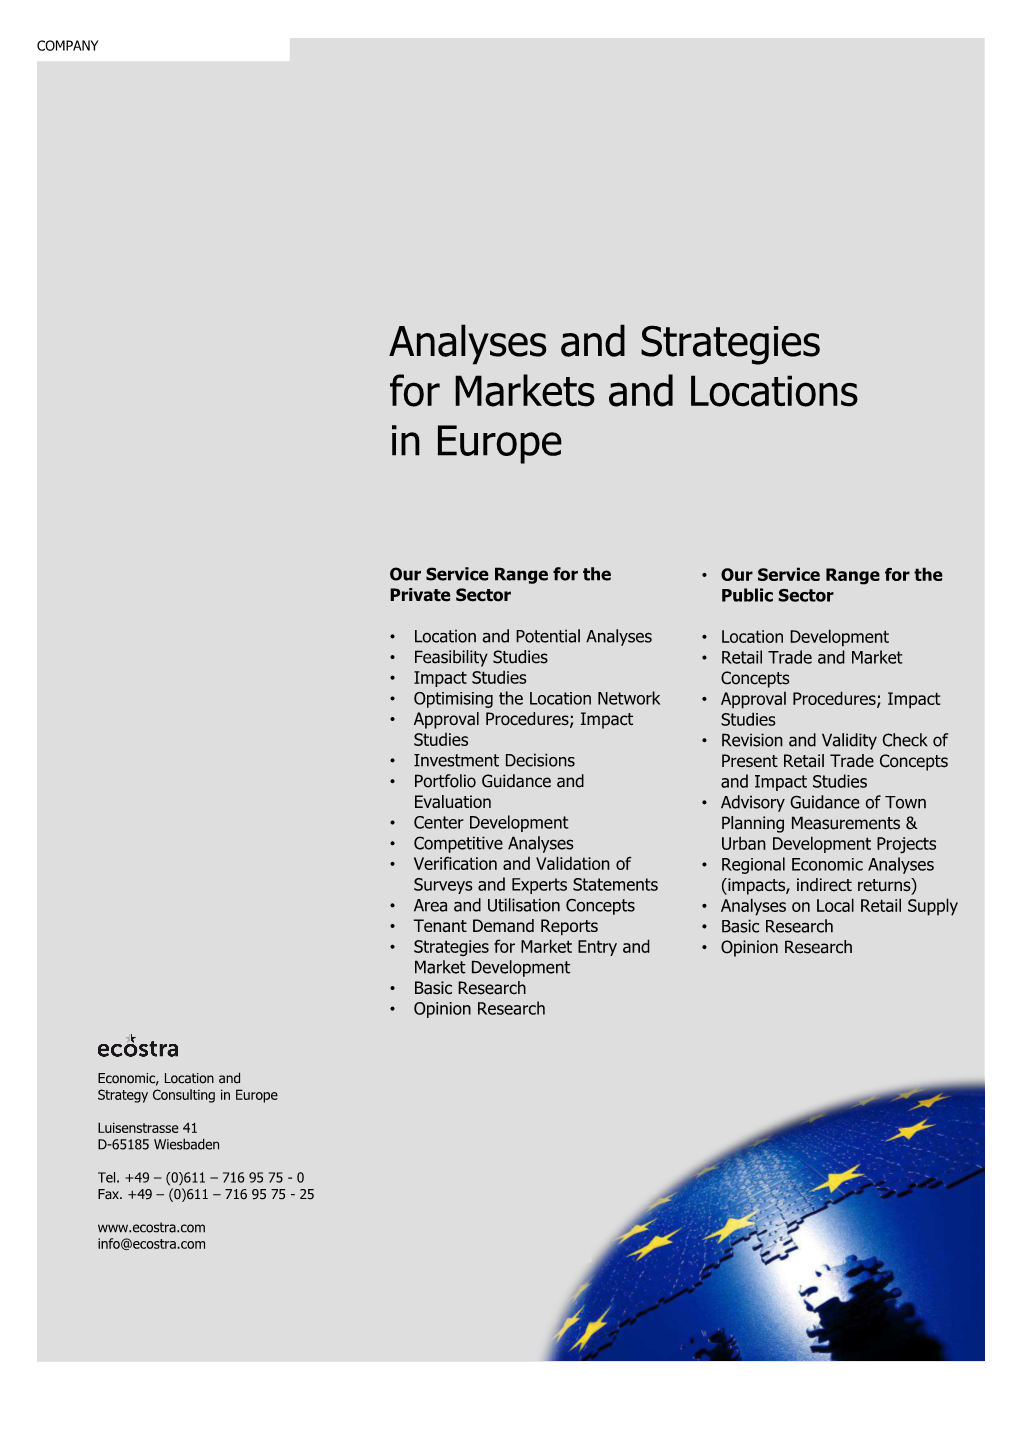 Analyses and Strategies for Markets and Locations in Europe